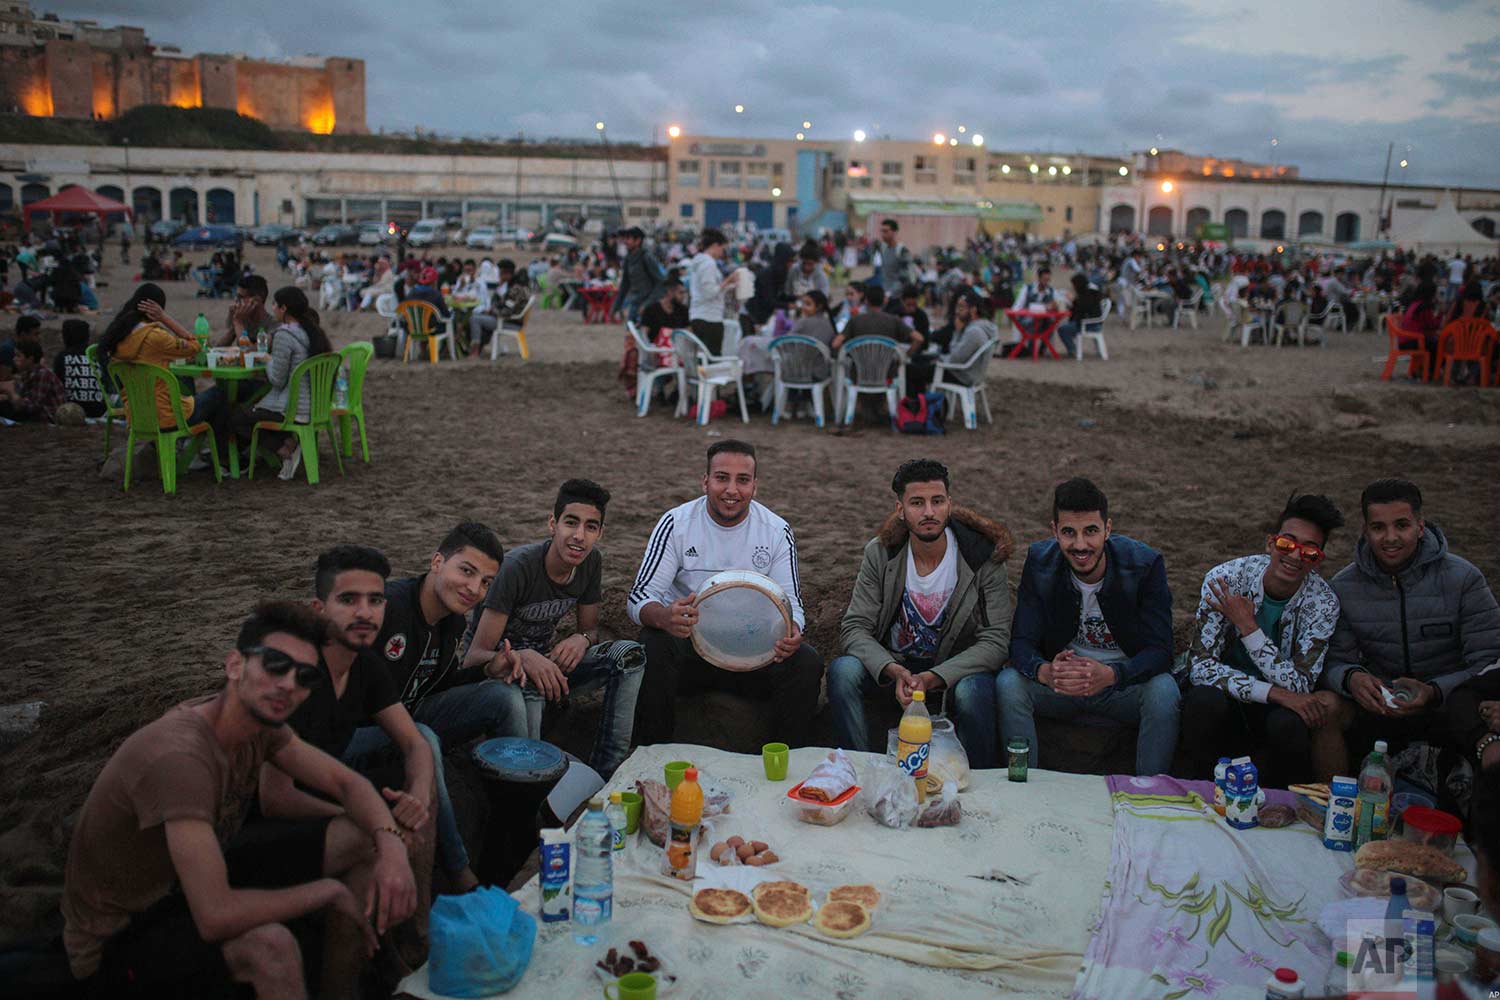  Young men pose for a photo as they gather to break their fast on the beach in the holy month of Ramadan, in Rabat, Morocco, Saturday, June 9, 2018. (AP Photo/Mosa'ab Elshamy) 